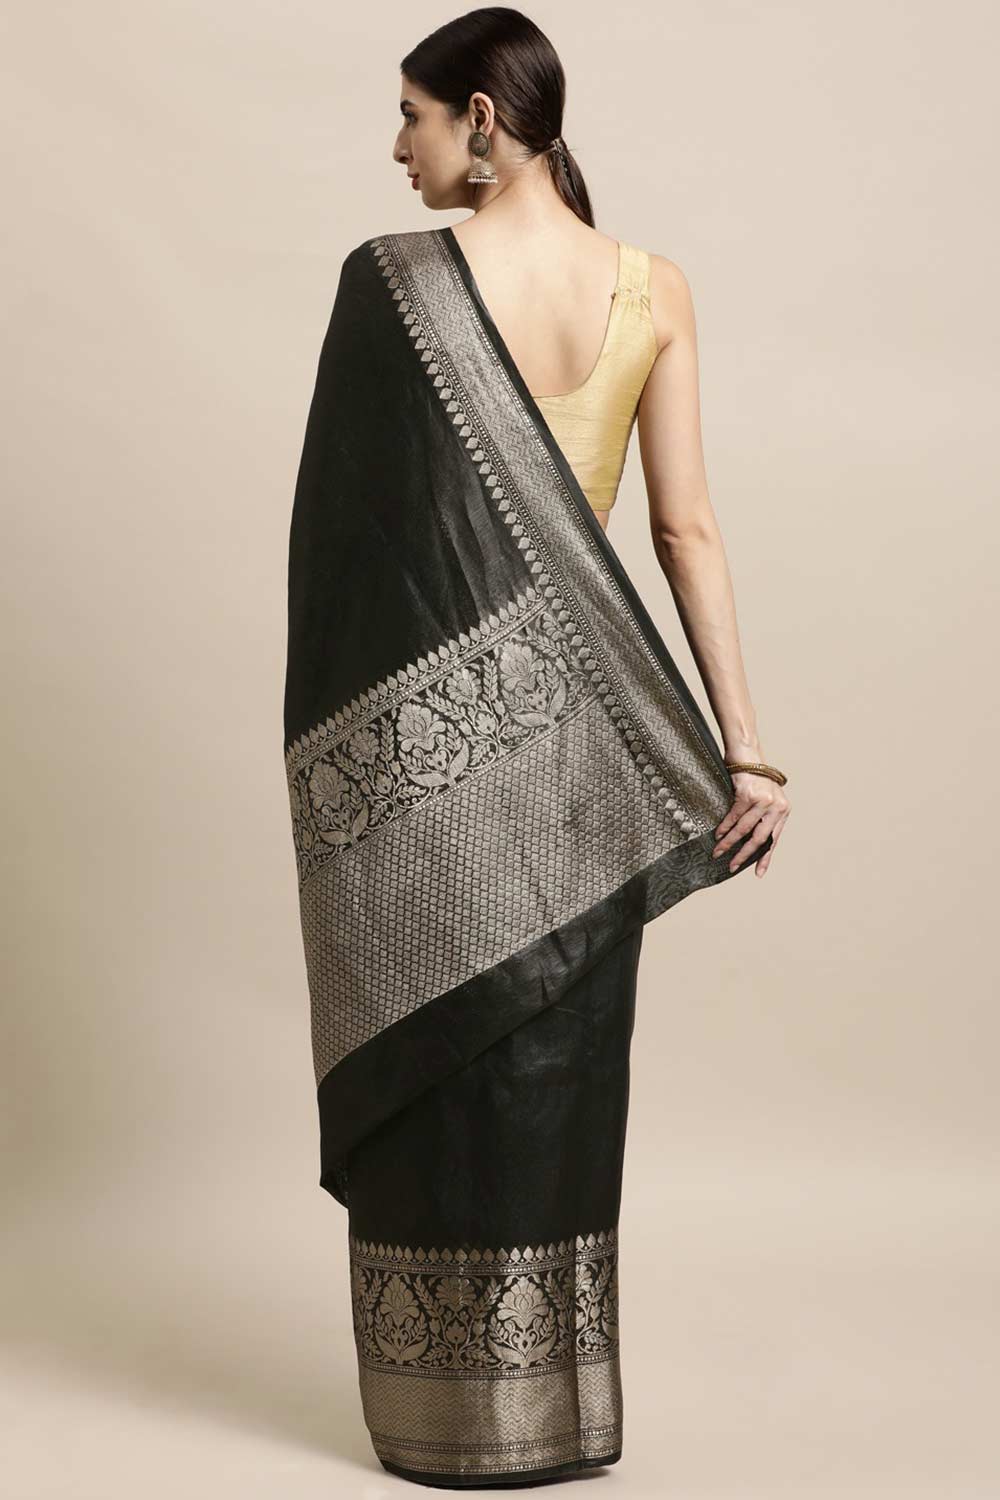 Shop Sahara Black Zari Woven Linen Blend One Minute Saree at best offer at our  Store - One Minute Saree